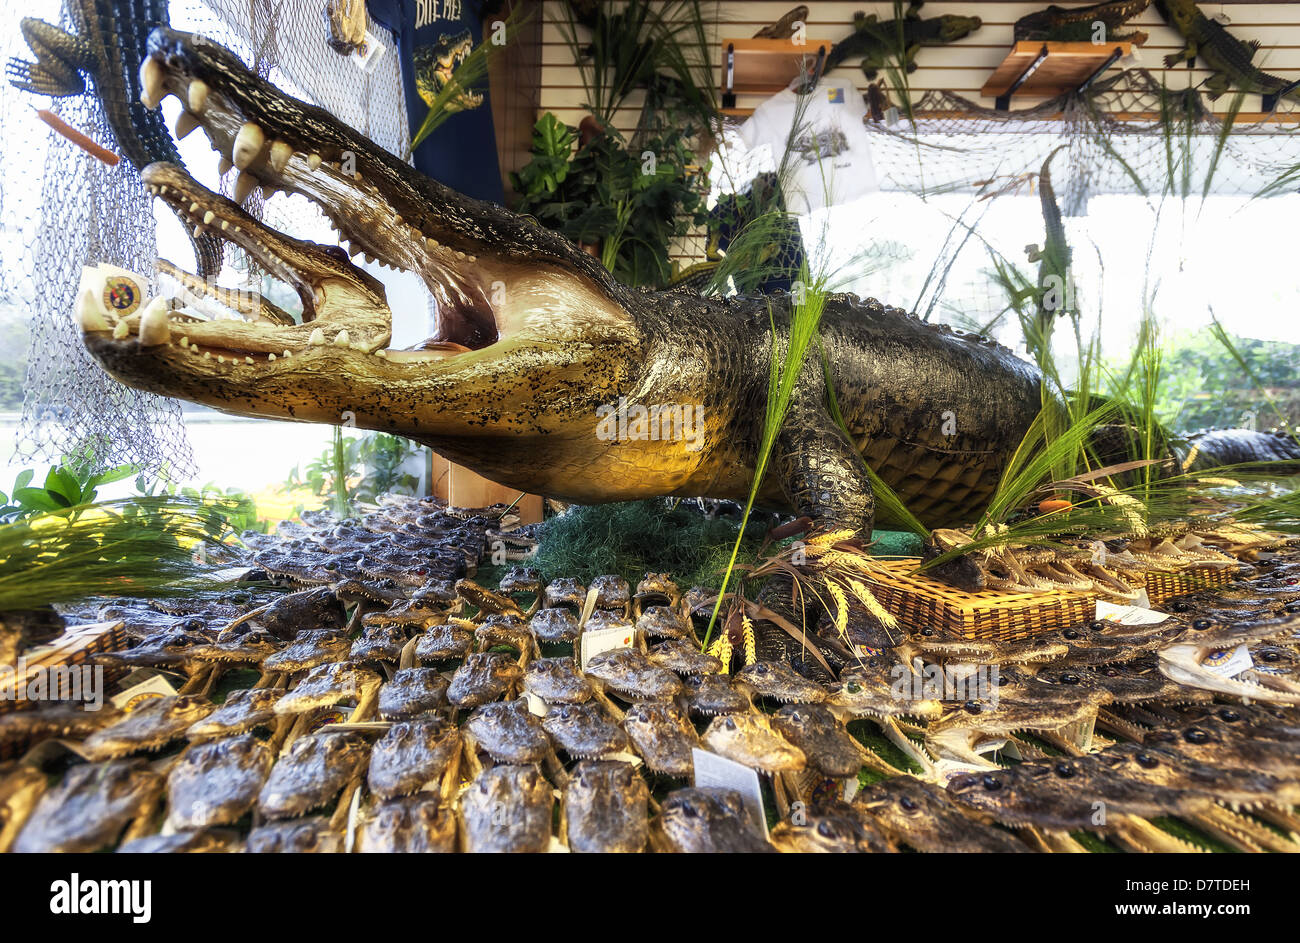 Gator Heads for sale at a fruit stand on I-75, in Ocala Florida. Stock Photo